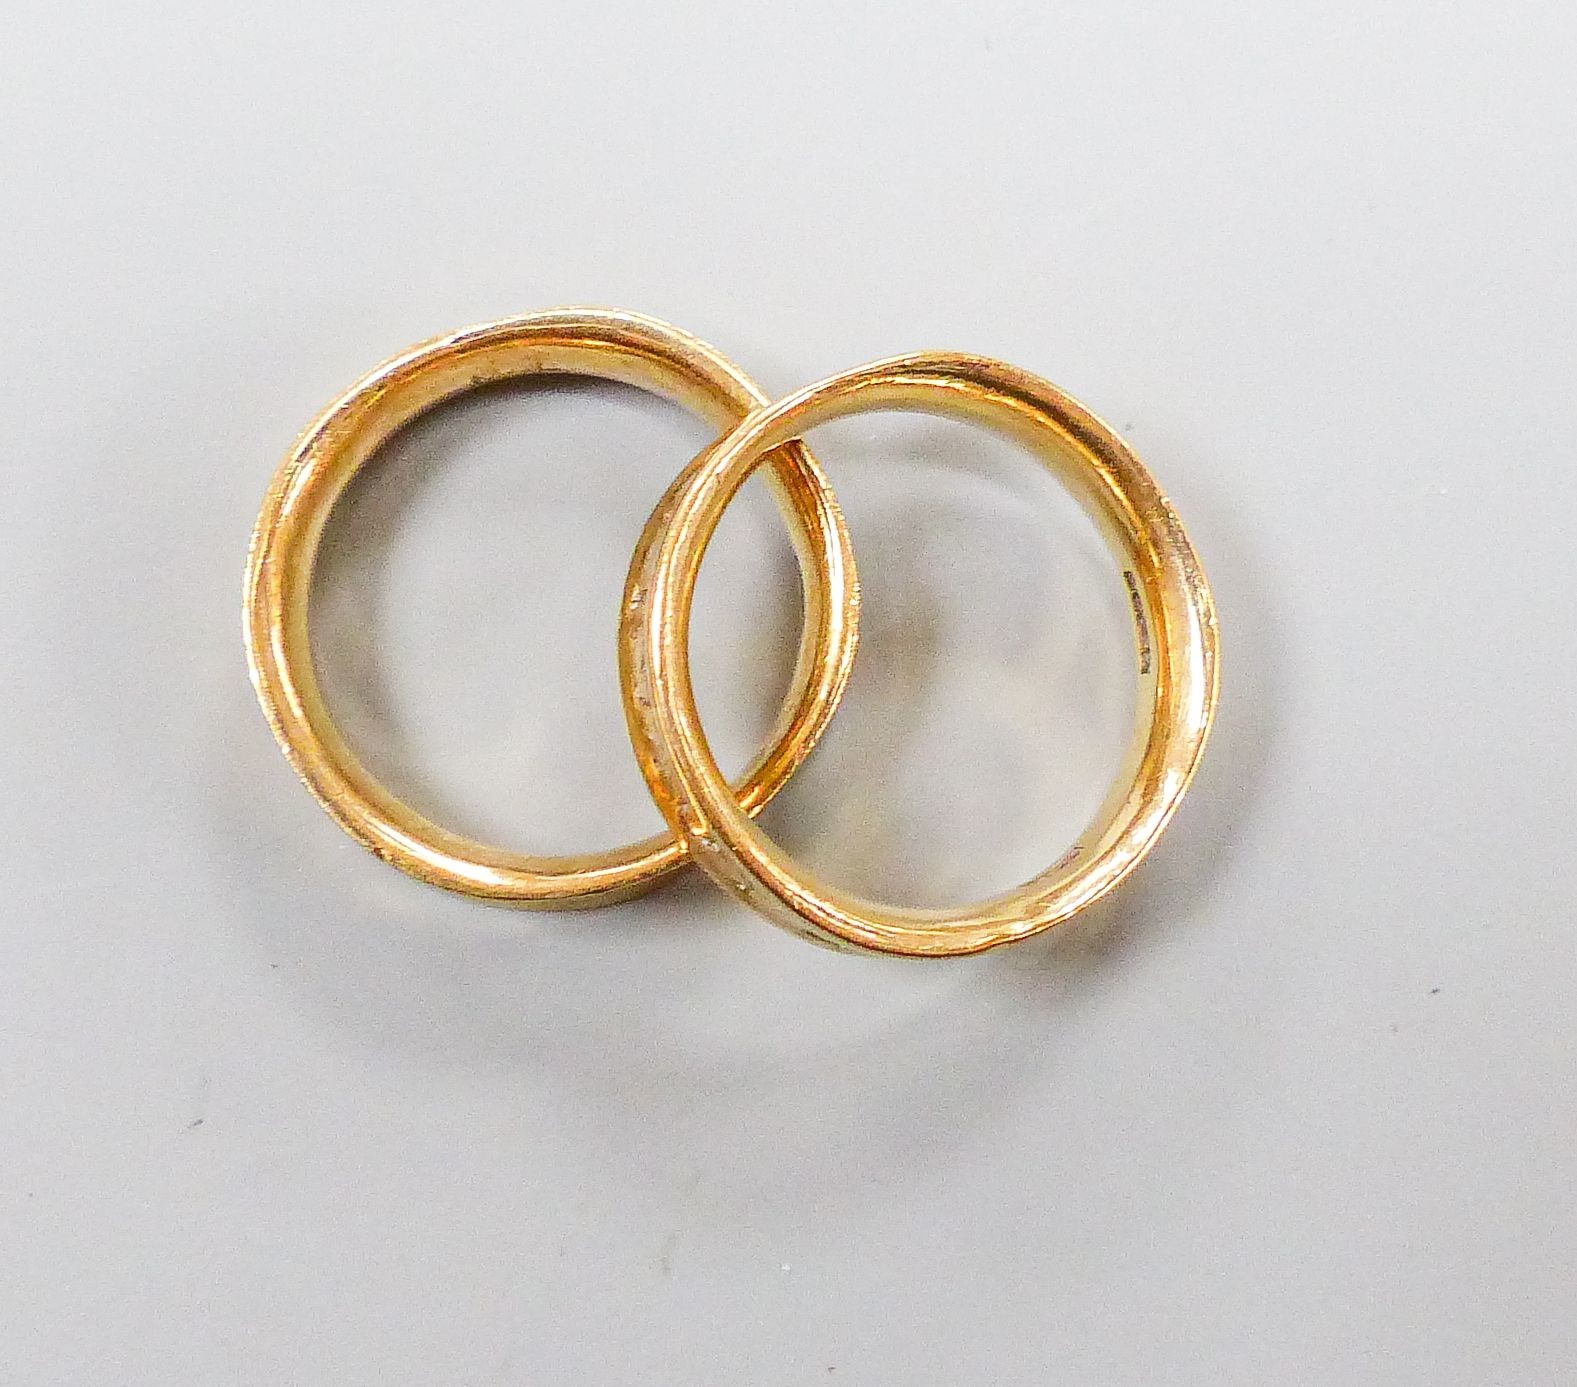 Two modern 9ct gold bands, with latin inscription, both N/O, 8.3 grams.